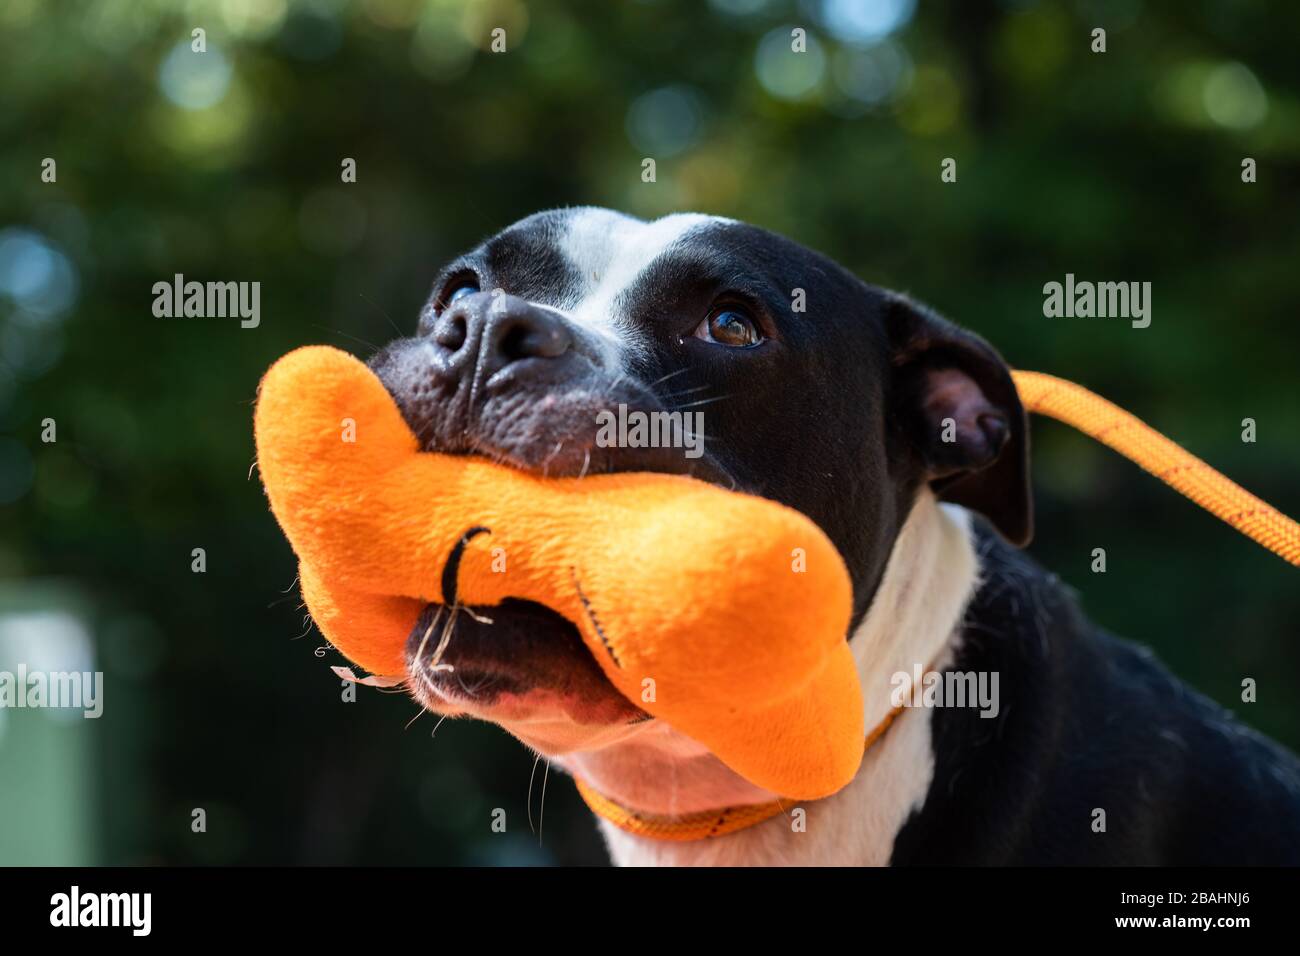 Black and White dog with an orange Toy in it's mouth Stock Photo